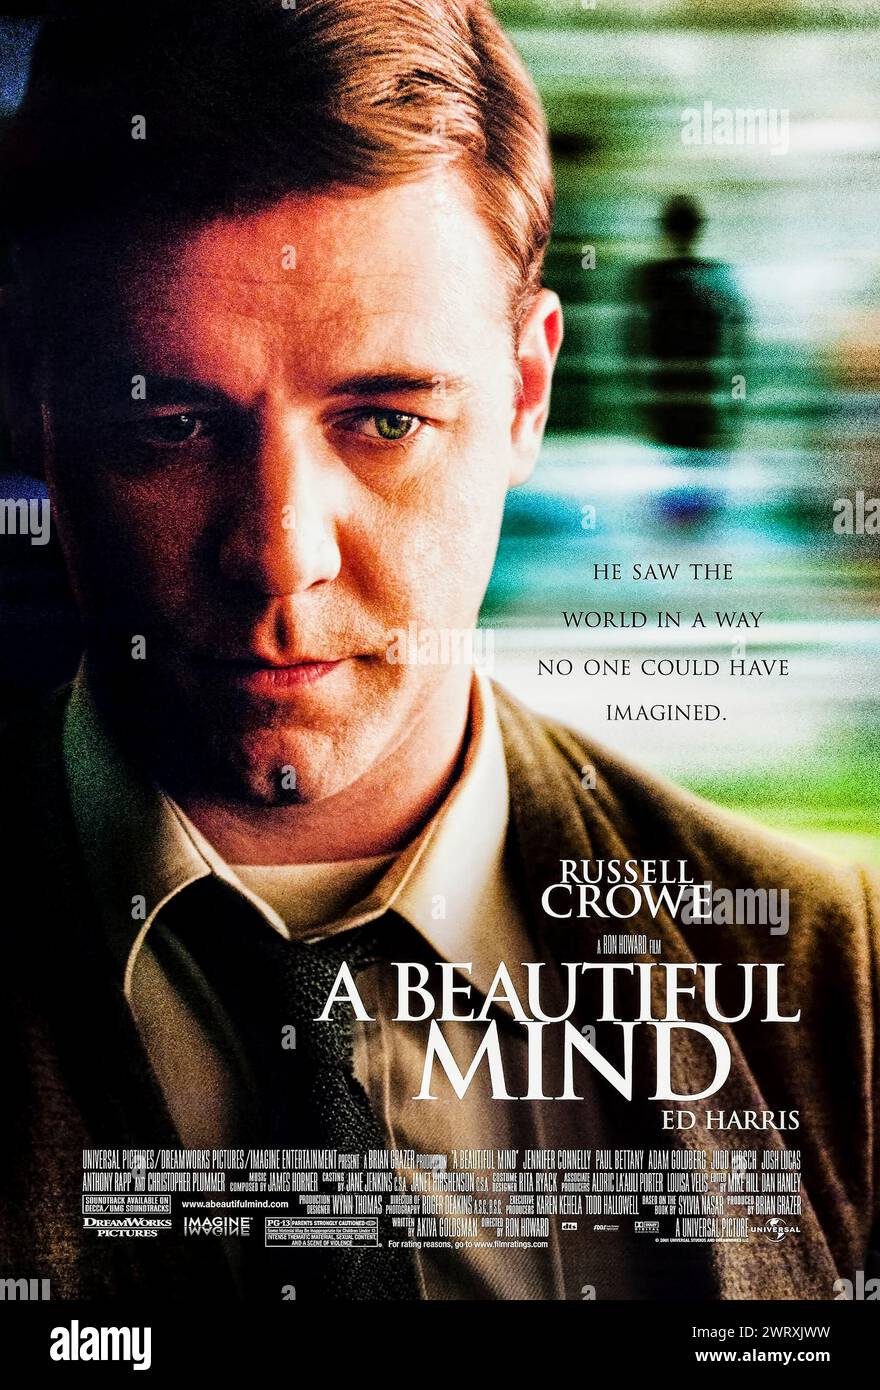 A Beautiful Mind (2001) directed by Ron Howard and starring Russell Crowe, Ed Harris and Jennifer Connelly. Biopic about mathematical genius John Nash who accepts secretive work in cryptography, but when he becomes aware of a larger conspiracy, begins to question his own reality. Photograph of an original 2001 US one sheet poster. ***EDITORIAL USE ONLY*** Credit: BFA / Universal Pictures Stock Photo